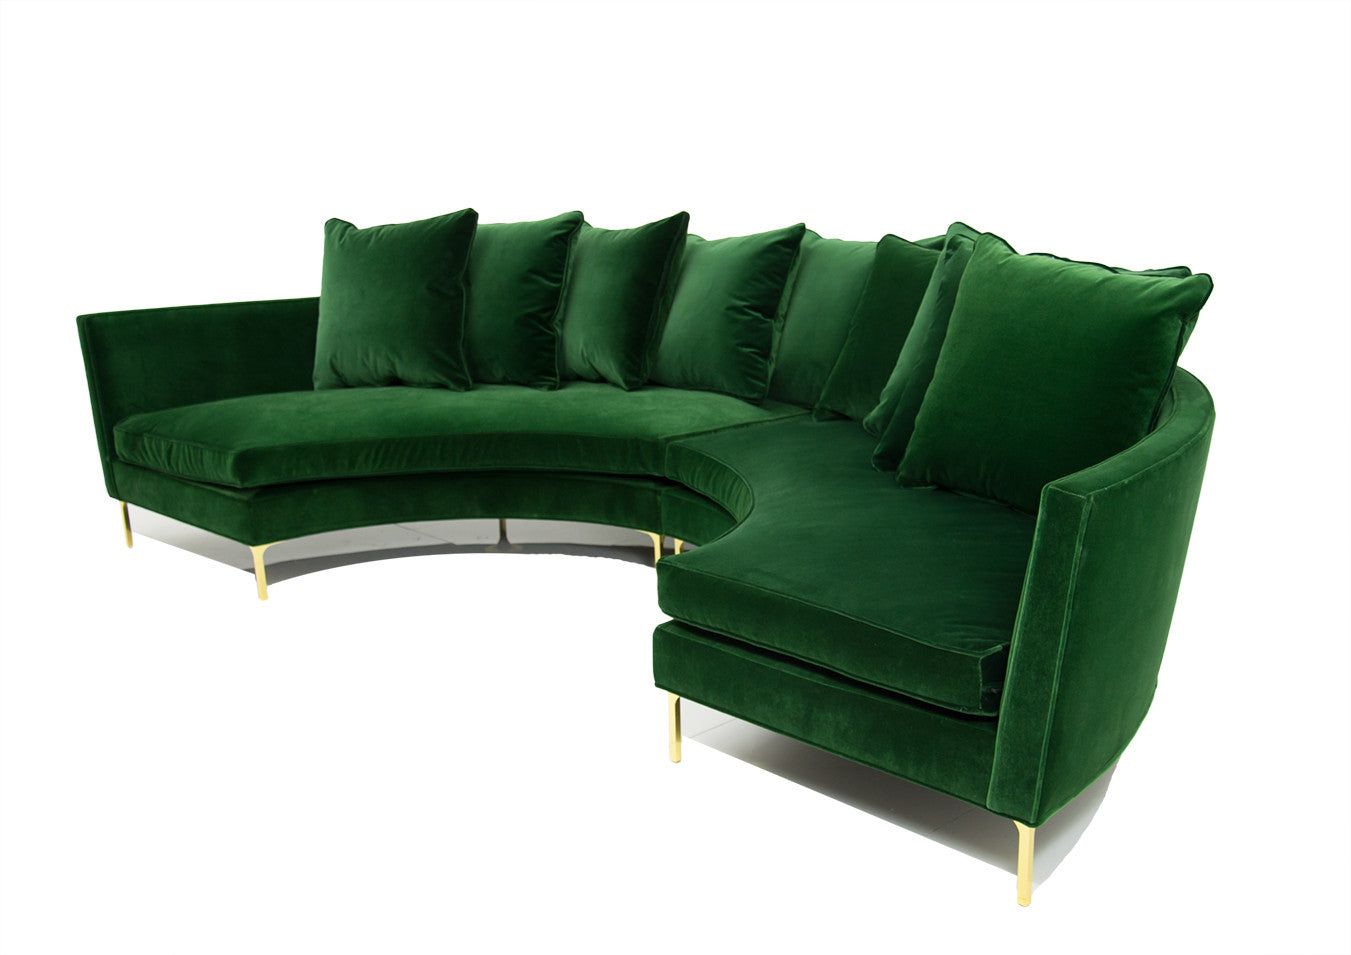 Sardinia Sectional – Emerald Green Velvet Sectional – Modshop With Regard To Green Velvet Modular Sectionals (View 3 of 20)